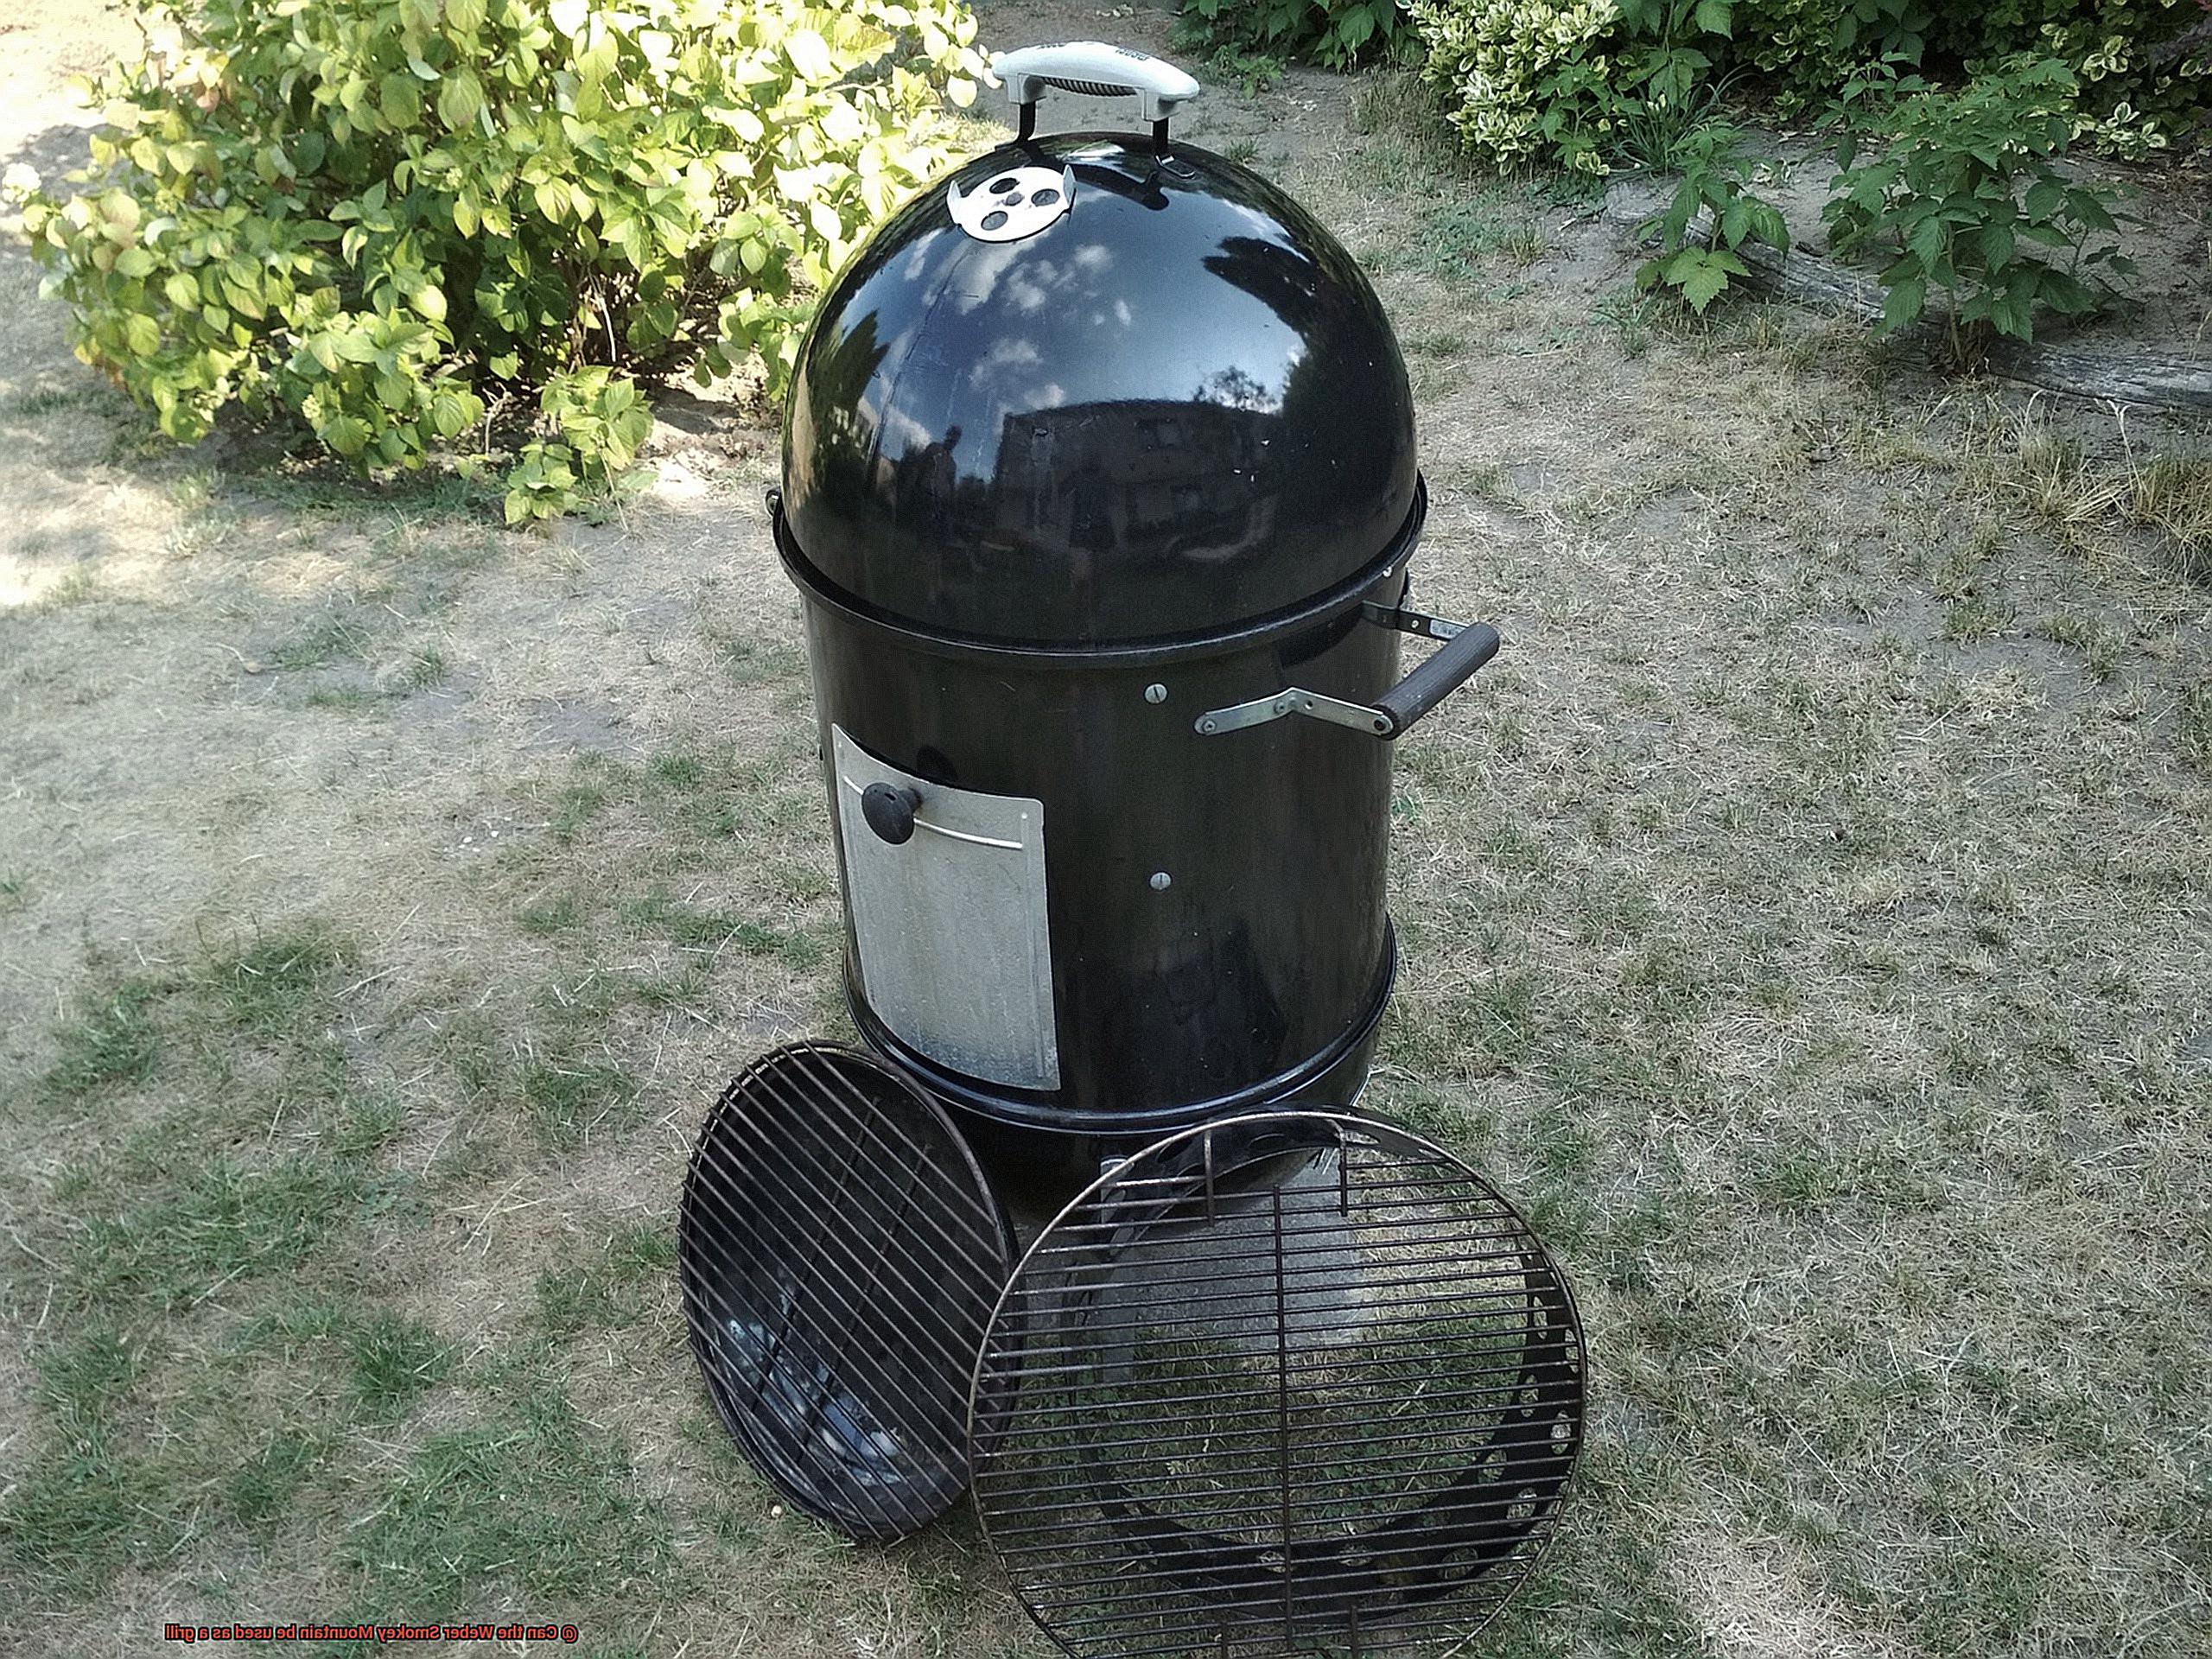 Can the Weber Smokey Mountain be used as a grill-6